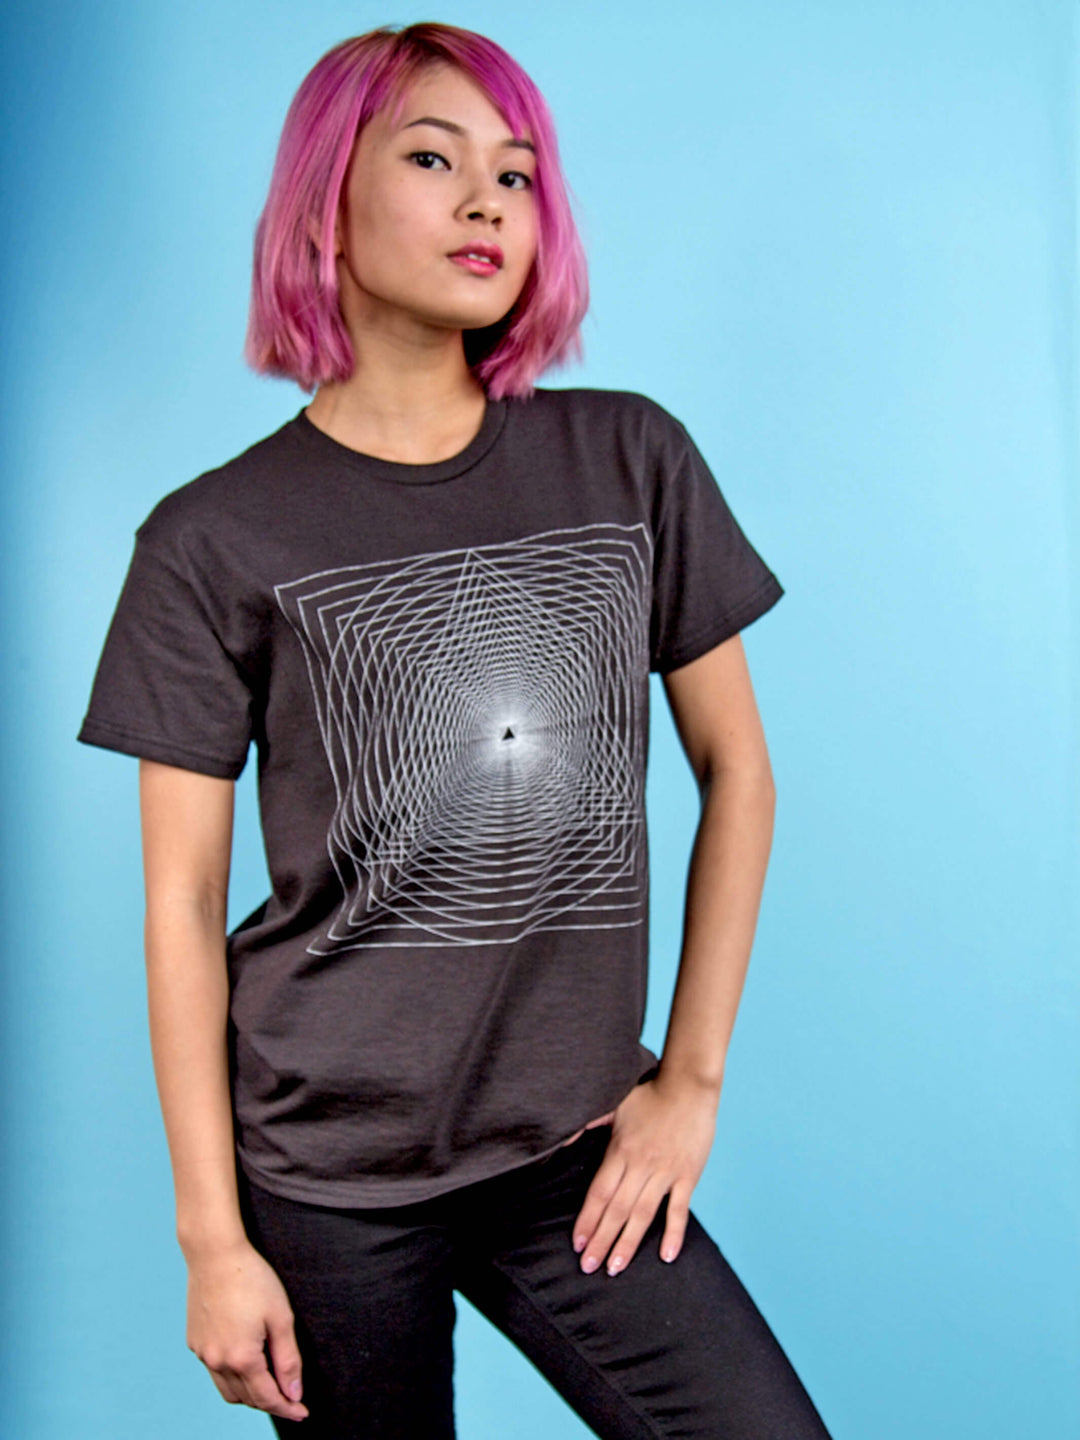 Unisex graphic t-shirt with an optical illusion design by Little Tokyo brand Popkiller.